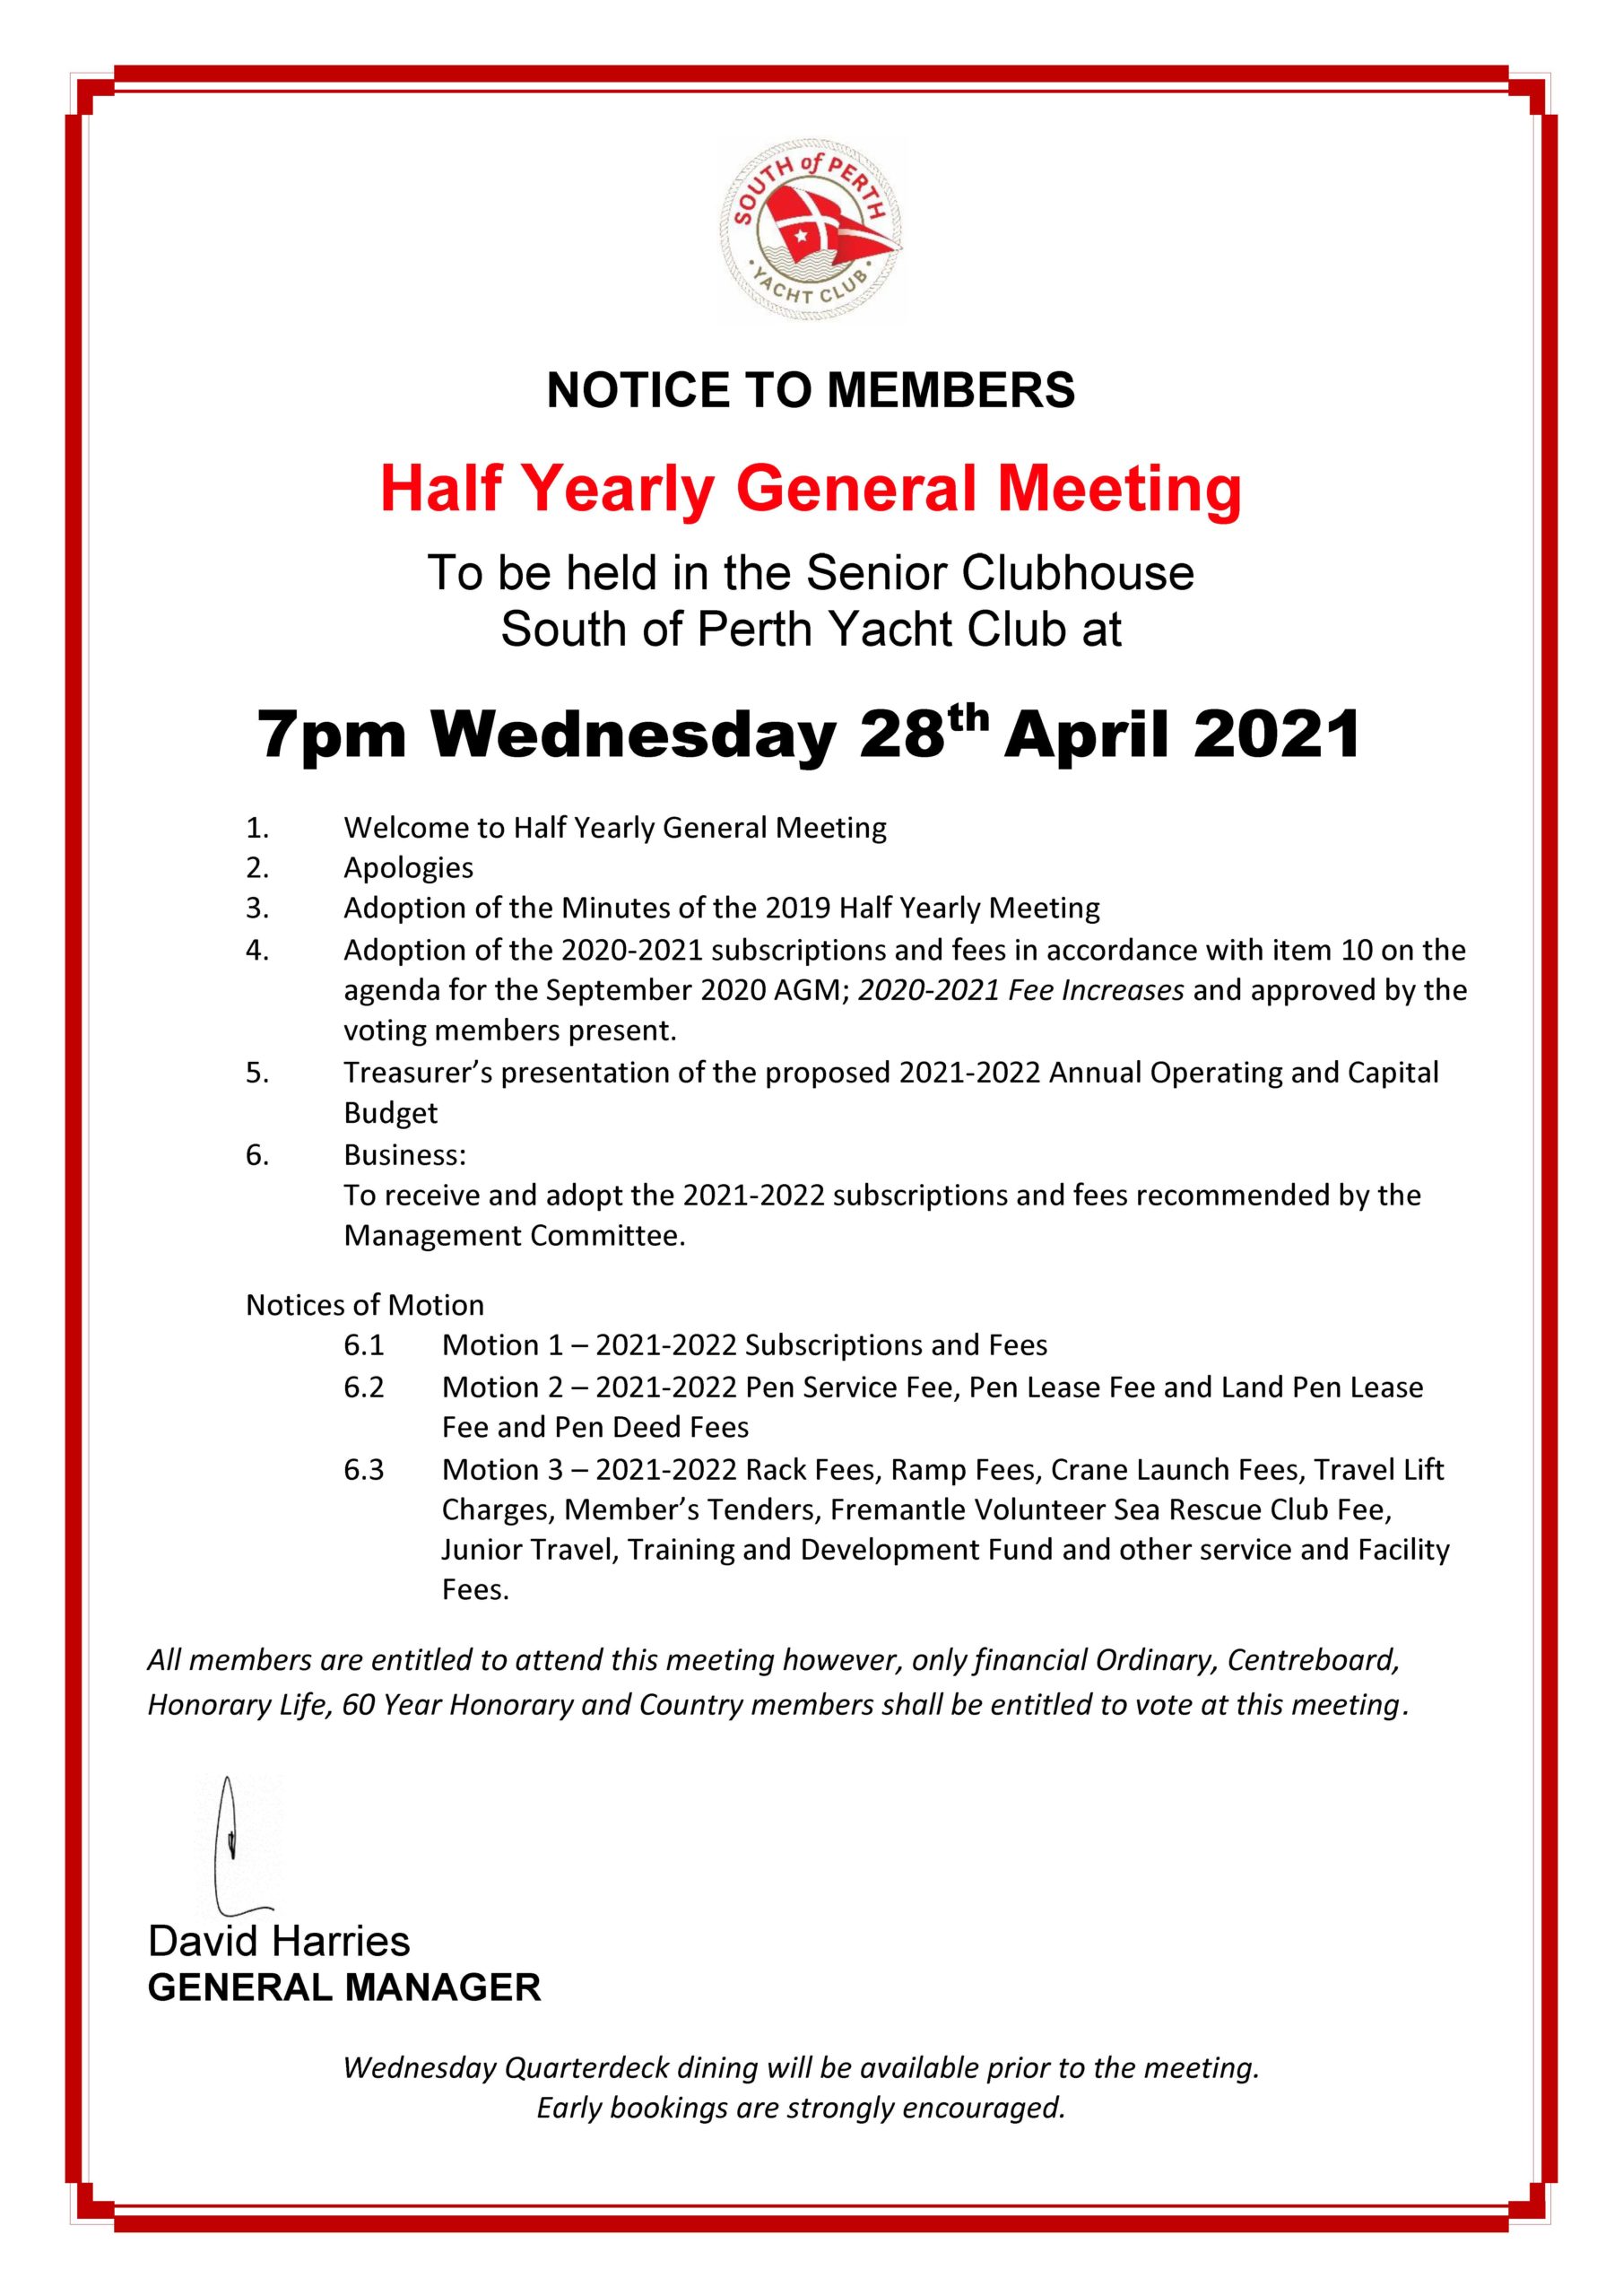 2021 Half Yearly Notice of Meeting